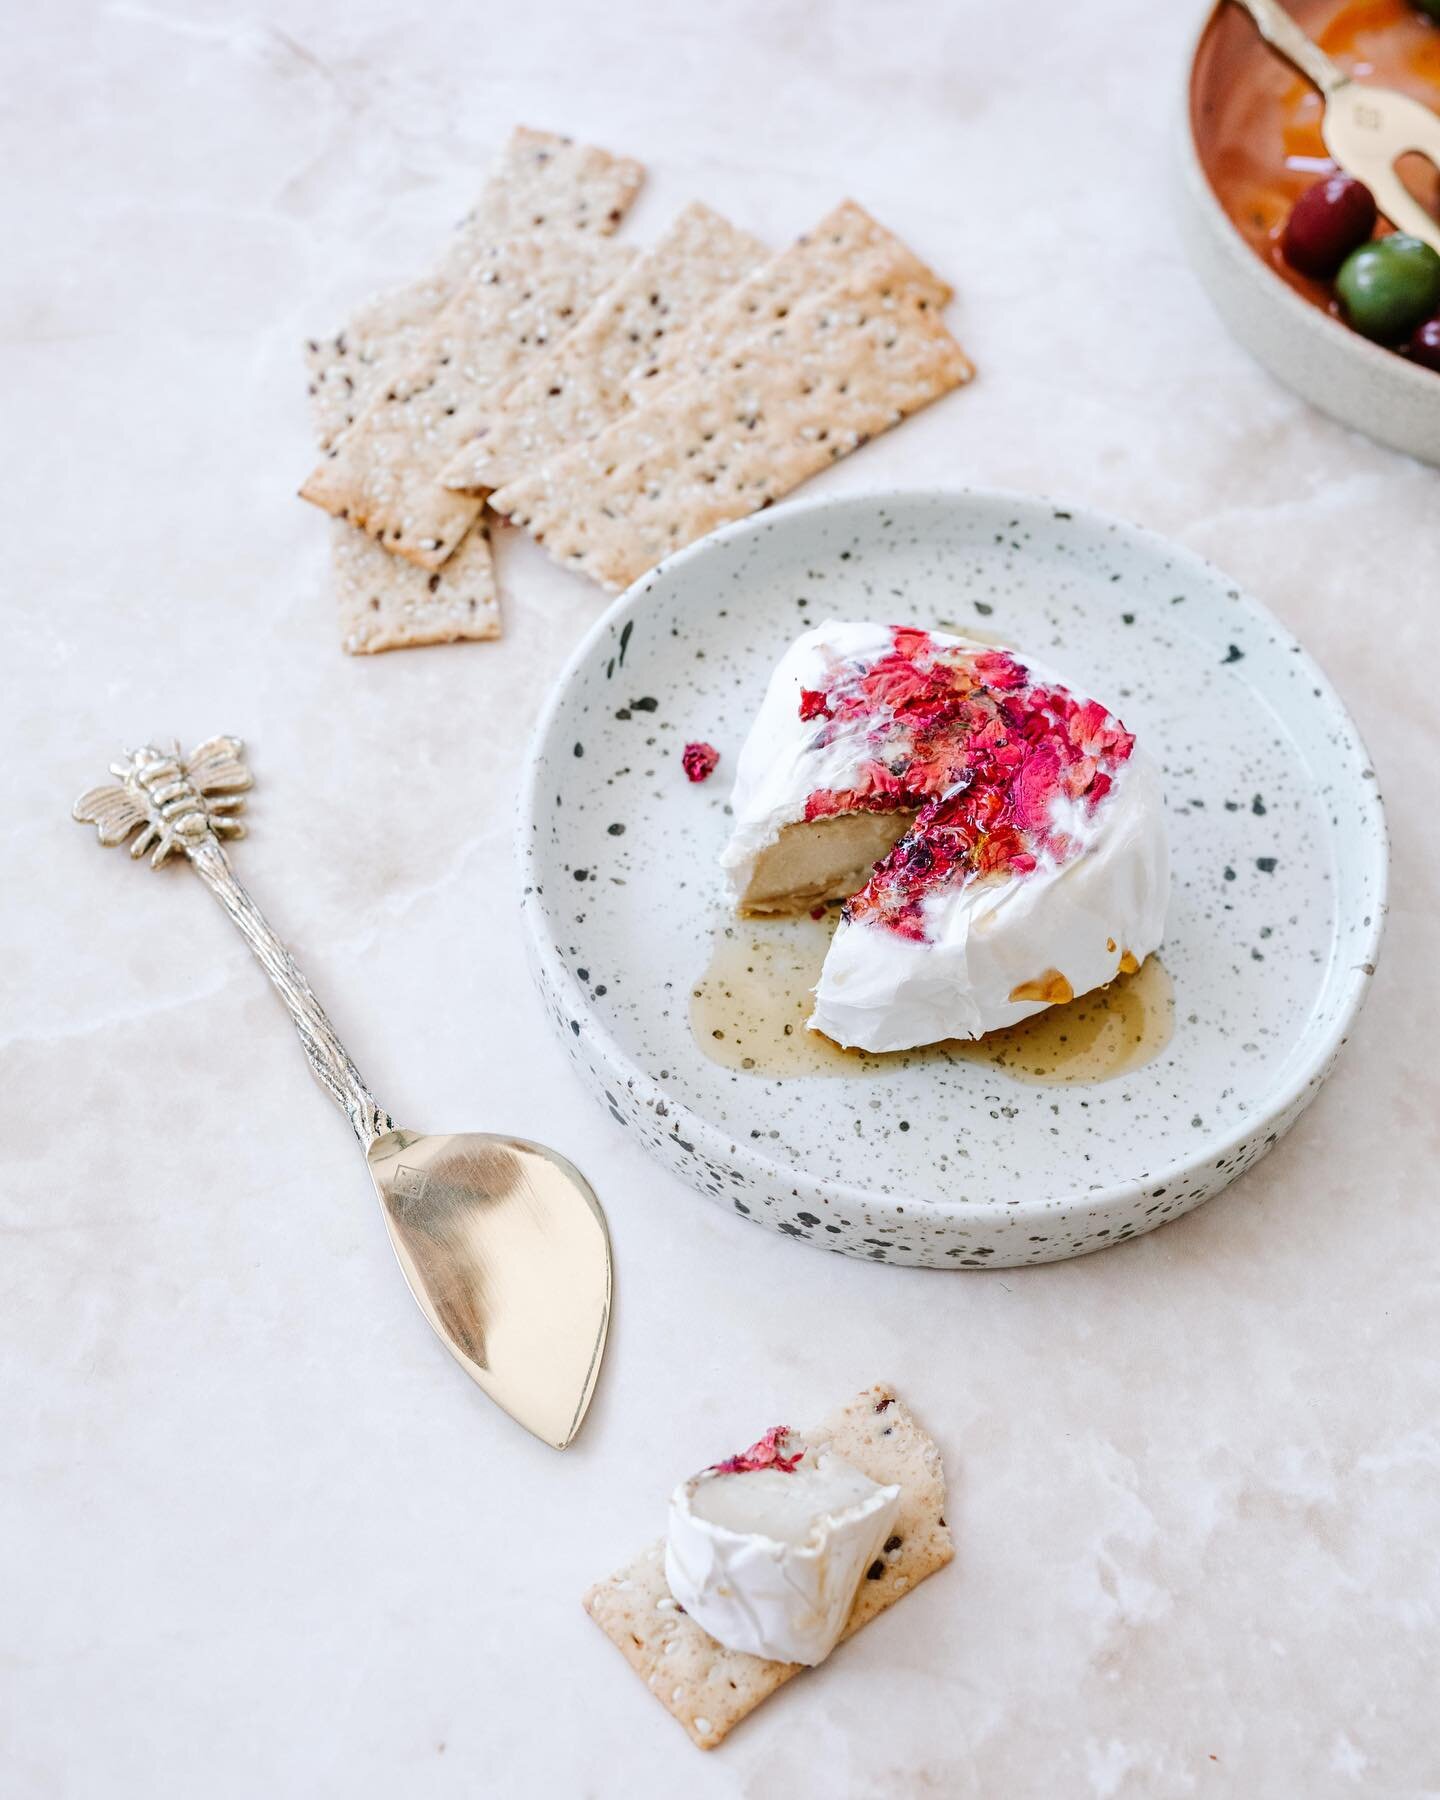 Our cheese knife sets will take your platter game to the next level ⚡️ launching on @thewholesomestore next week!!
ps. this vegan brie by @allthethings_au is insane! 😍 you gotta try their cheeses 👏🏼